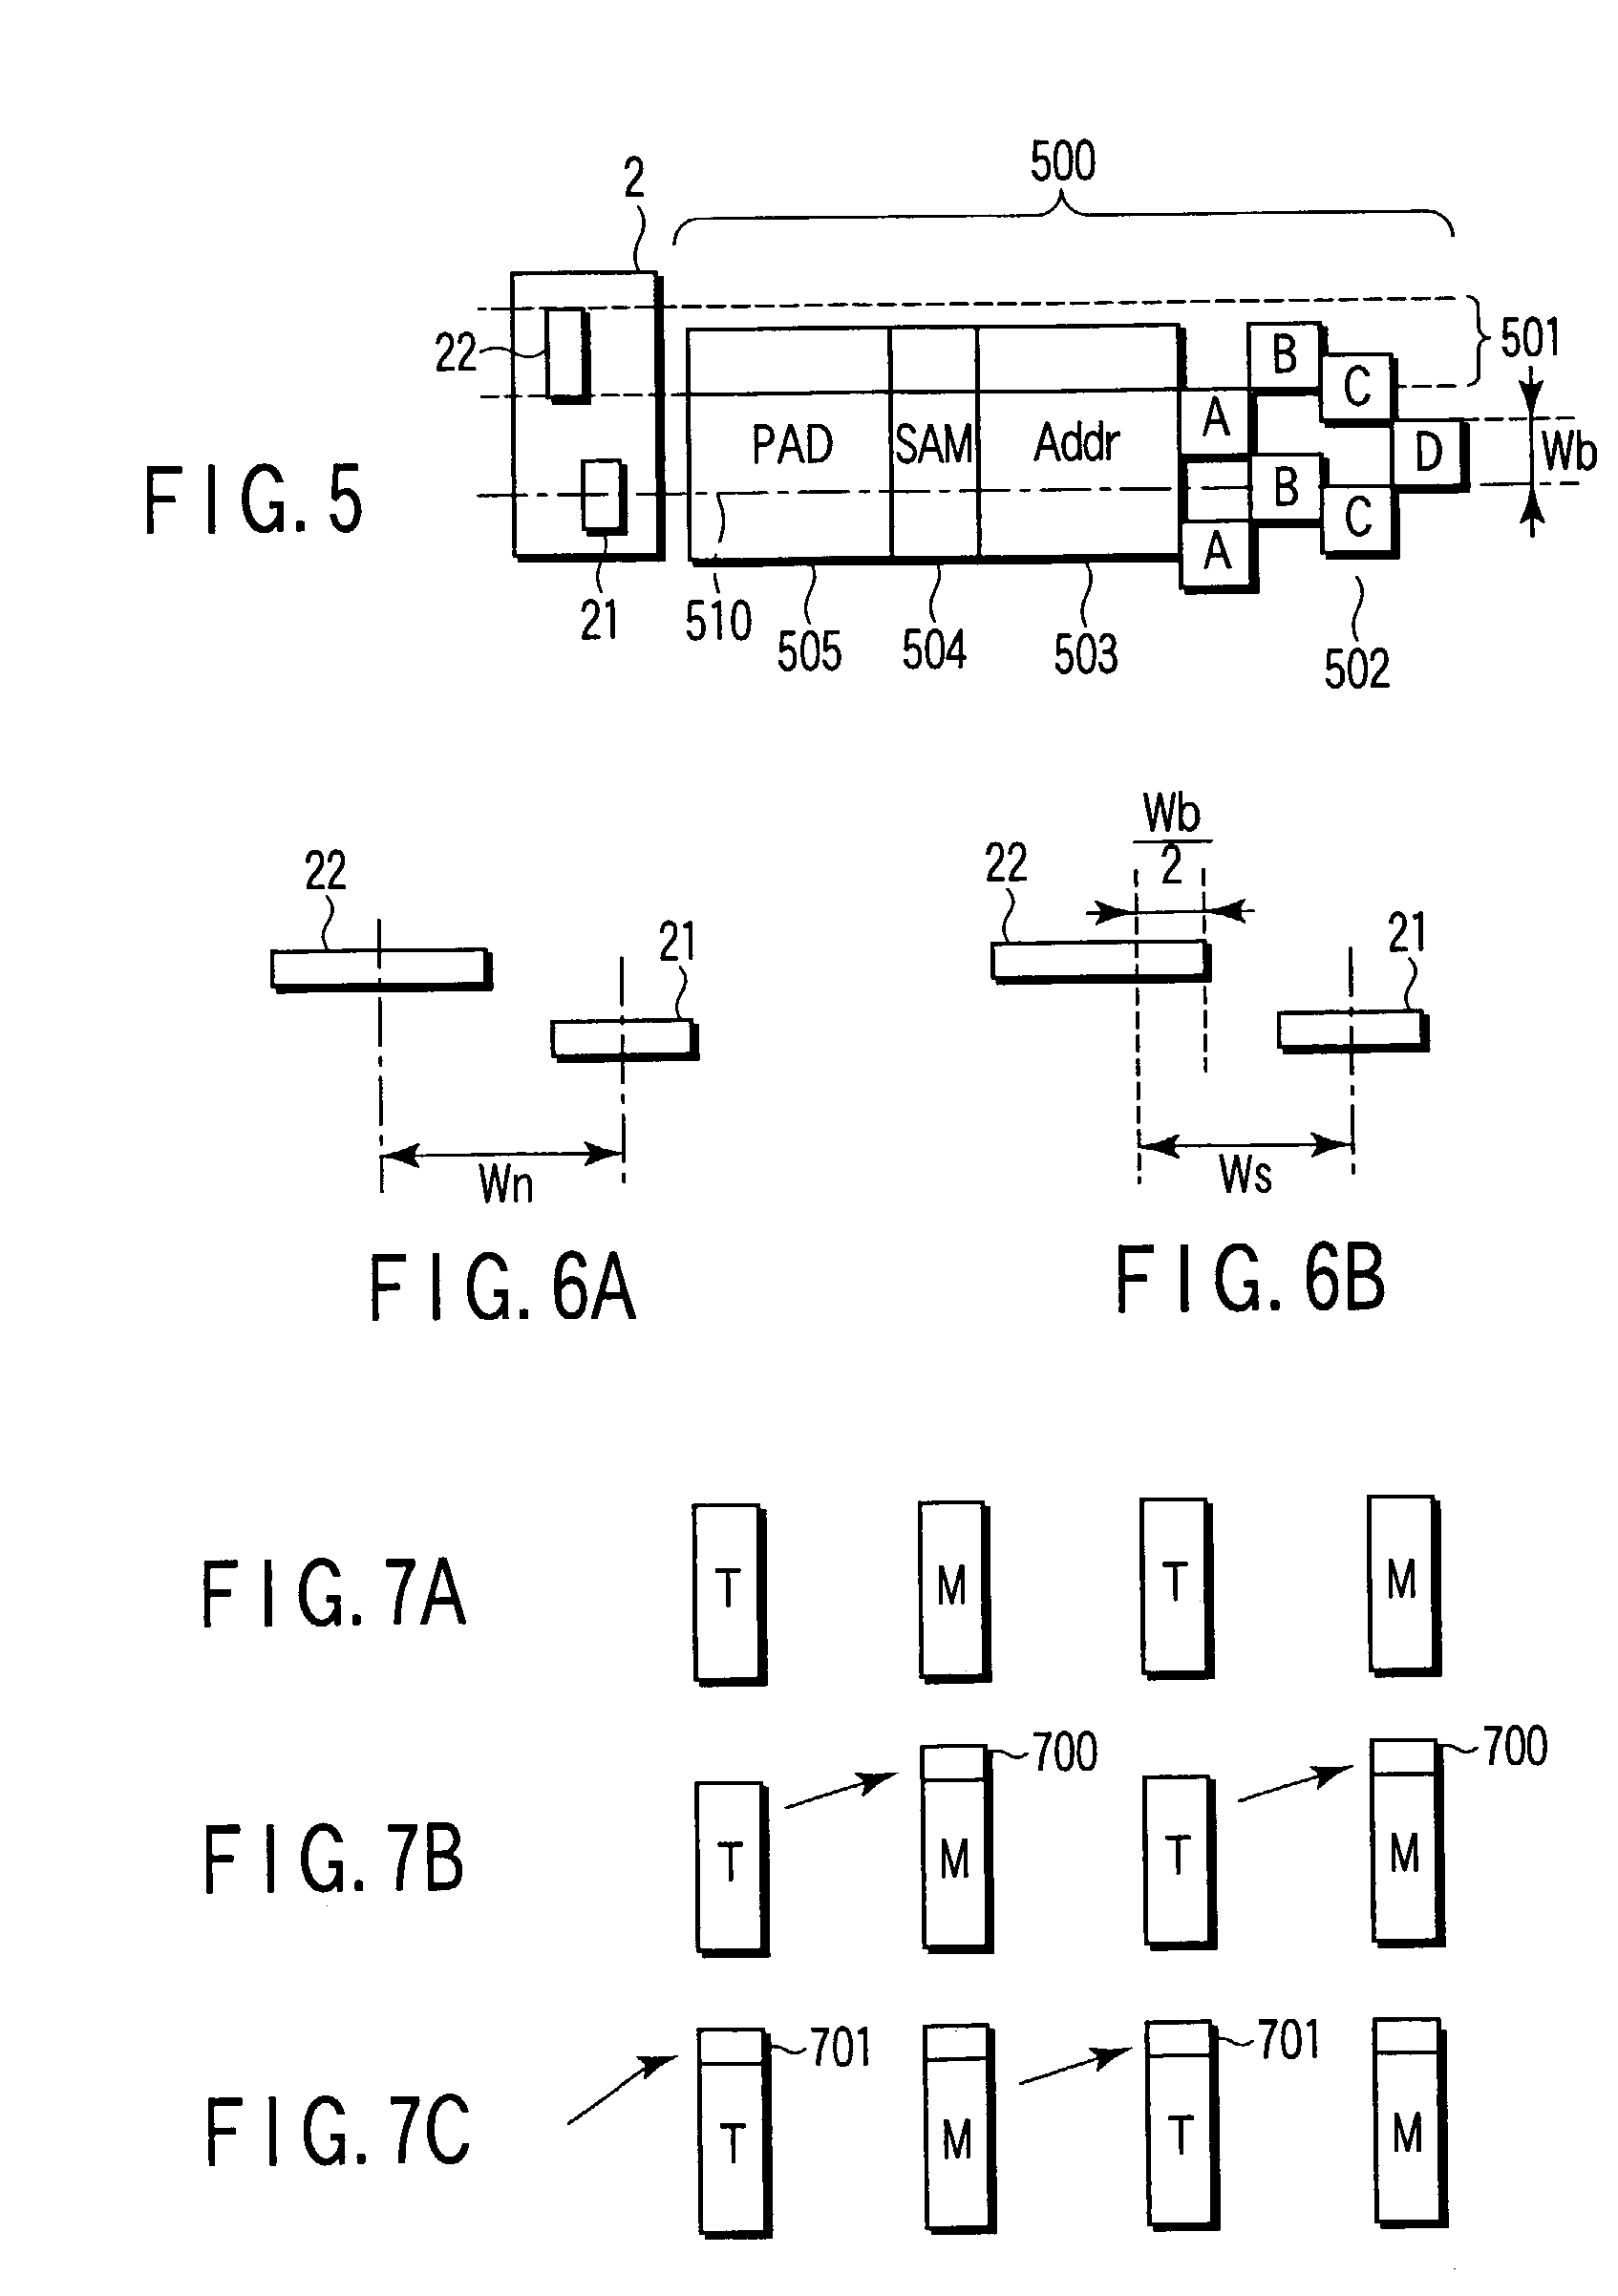 Method and apparatus for performing self-servo writing in a disk drive